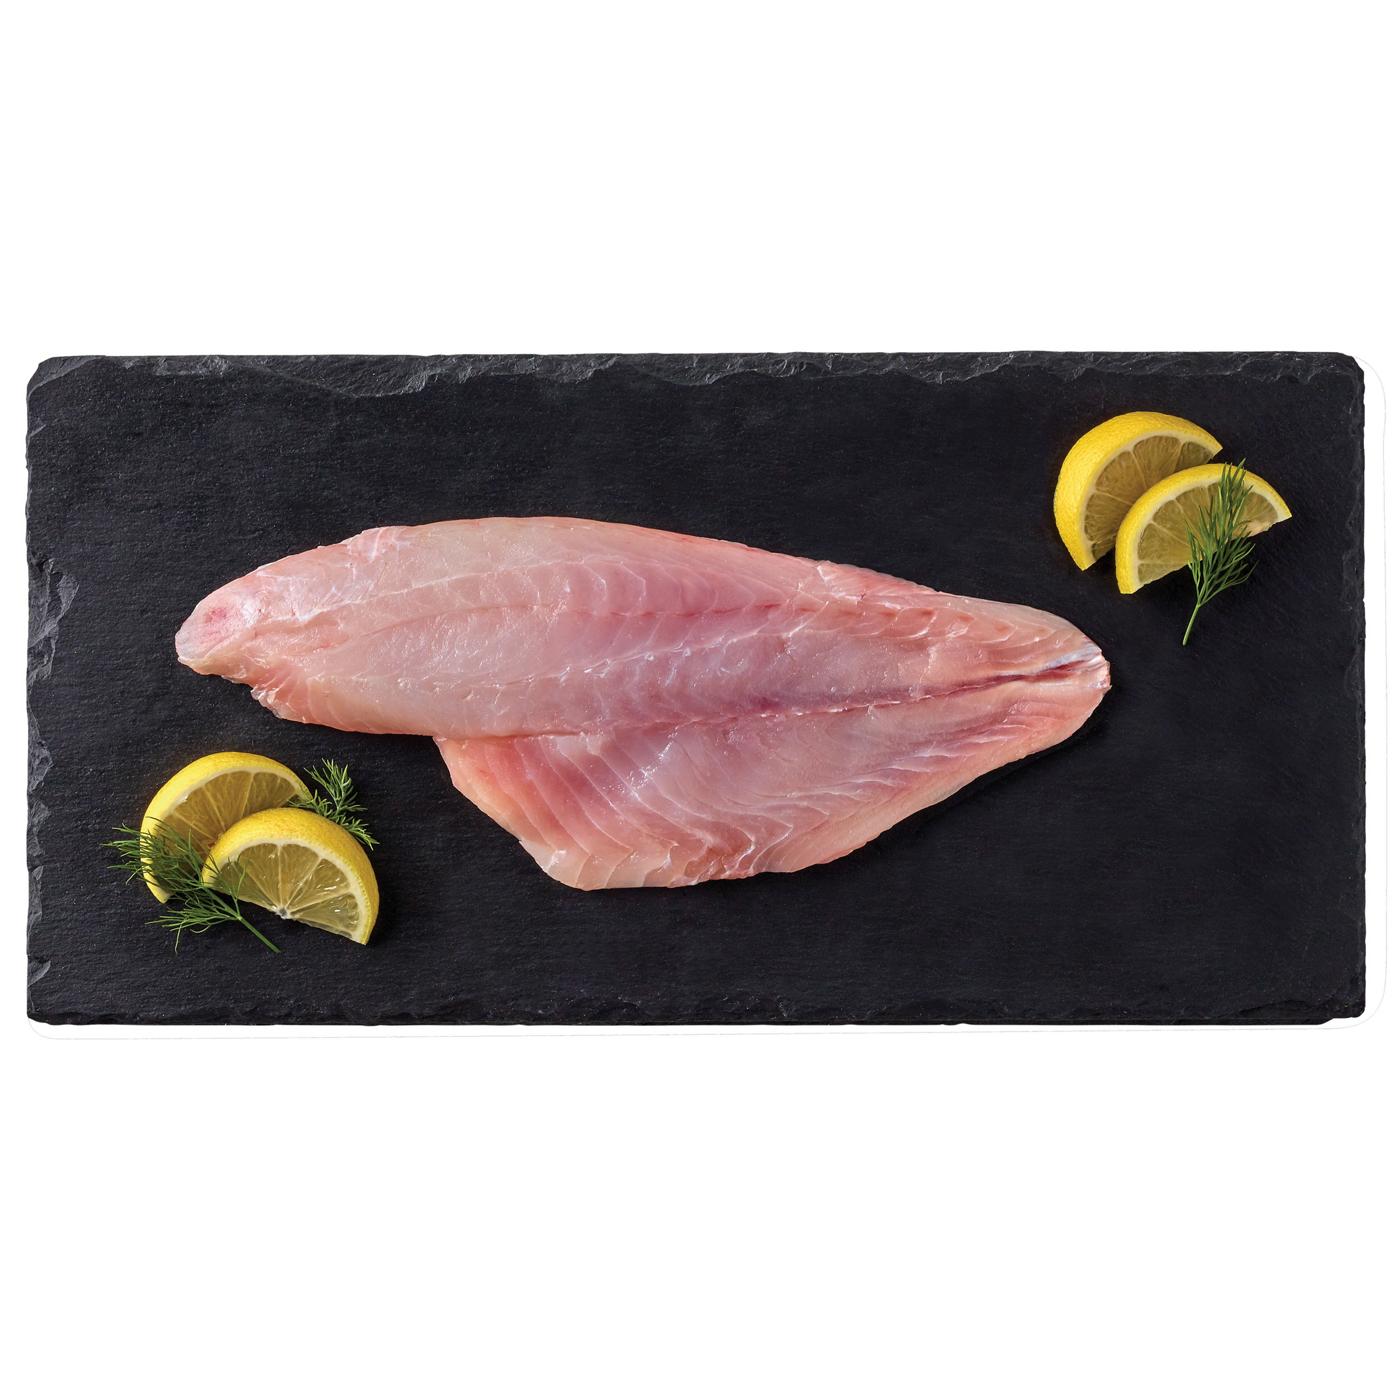 H-E-B Wild Caught Fresh American Red Snapper Fillet; image 1 of 2